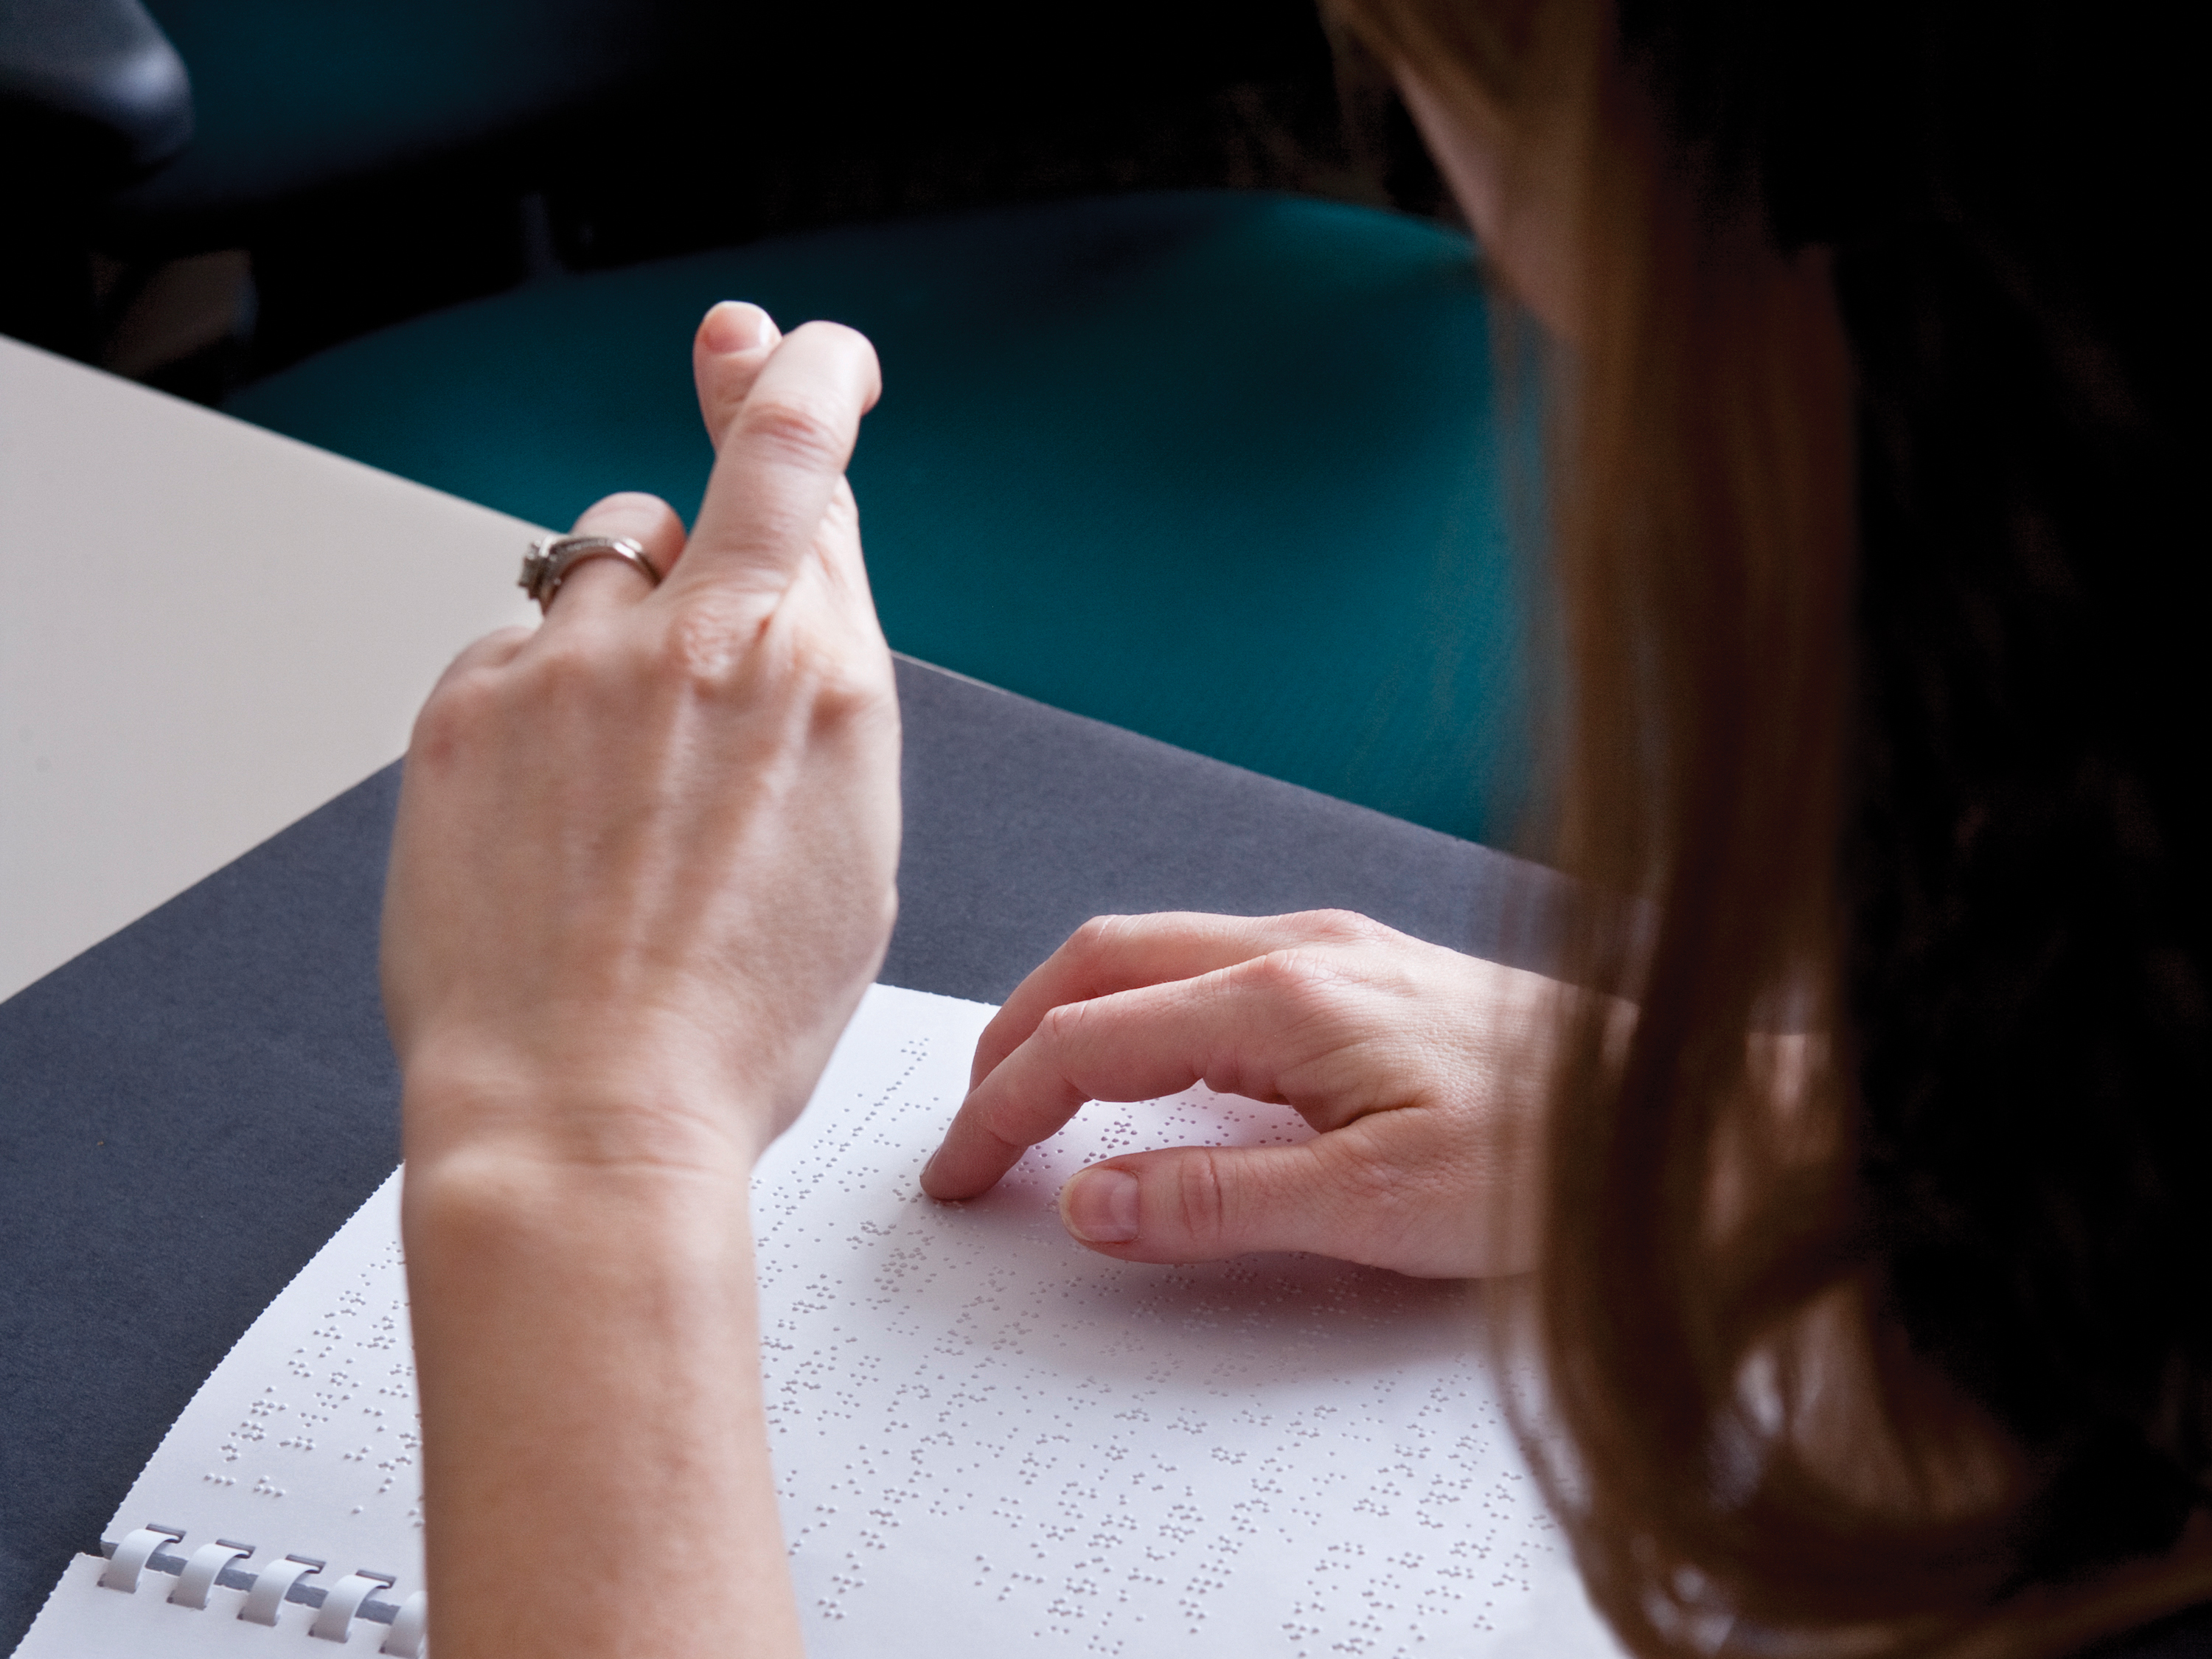 A person uses one hand to read braille, and the other to demonstrate sign language.